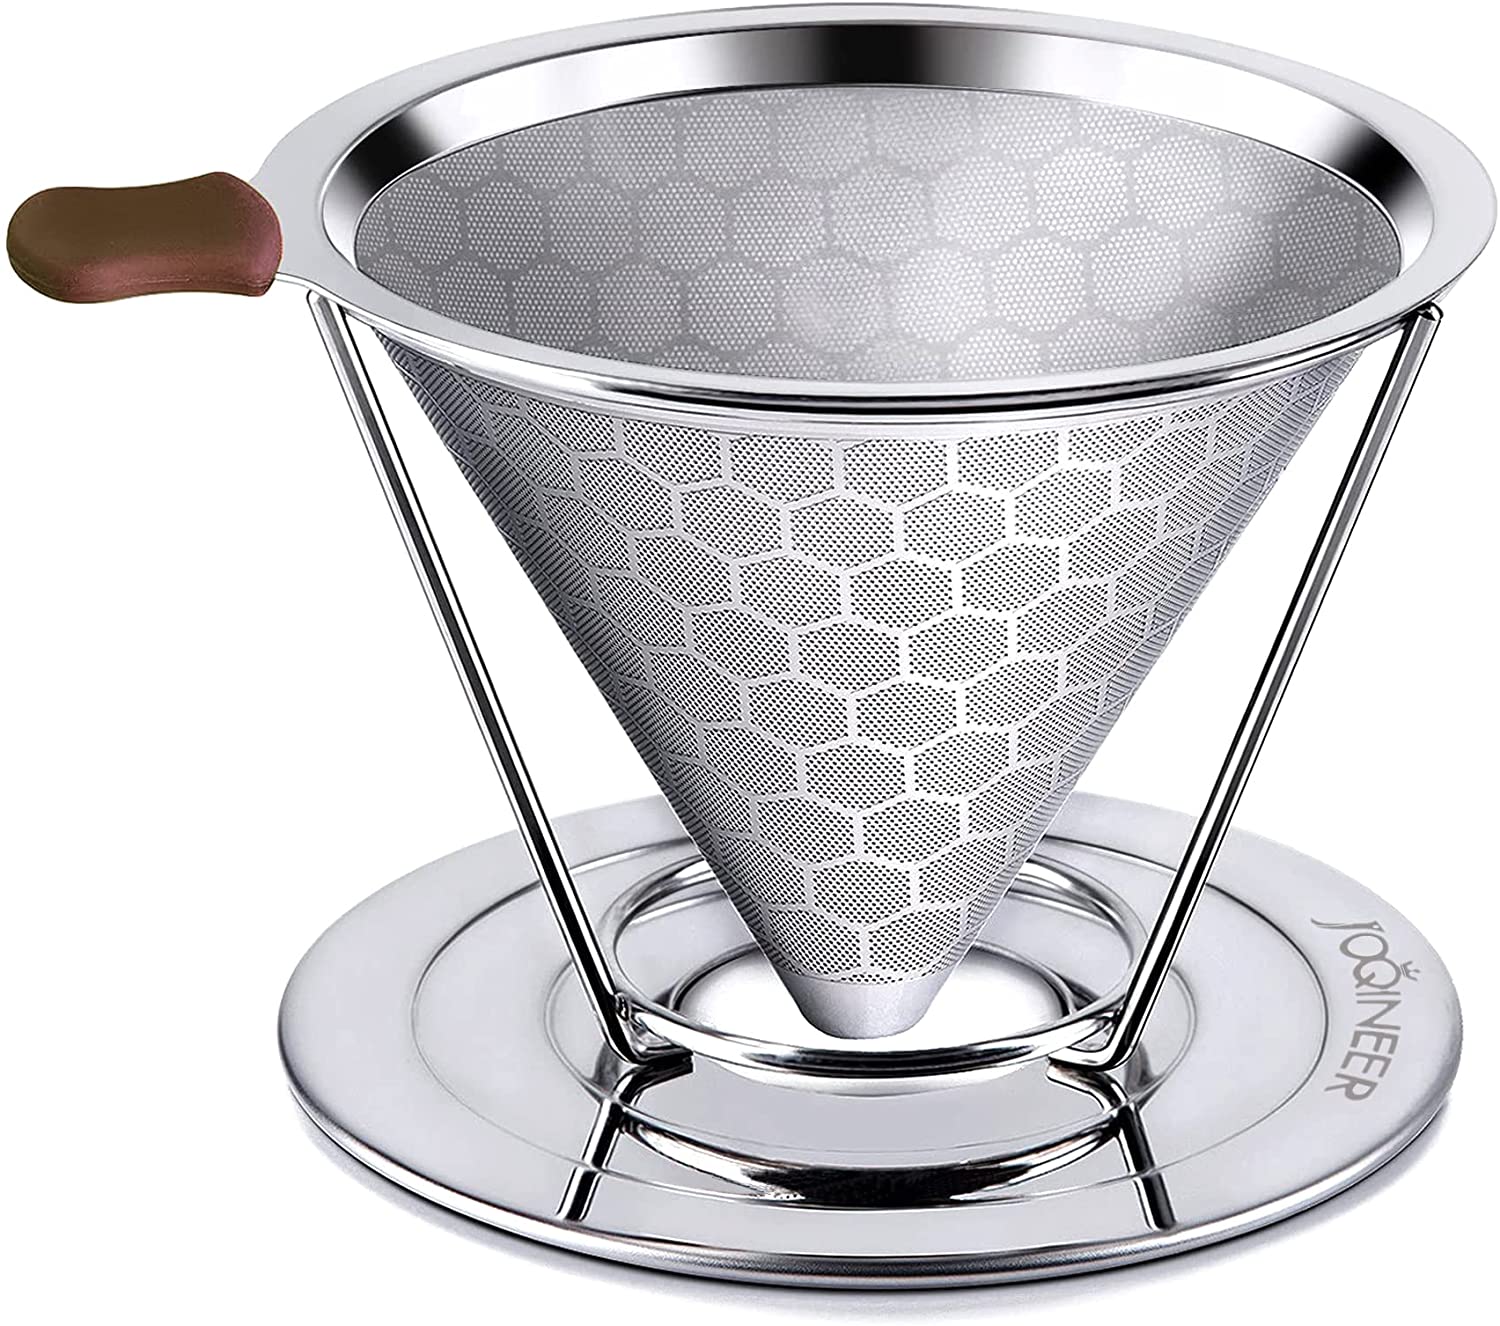 JOQINEER Pour Over Coffee Dripper Stainless Steel Coffee Filter Paperless Reusable P